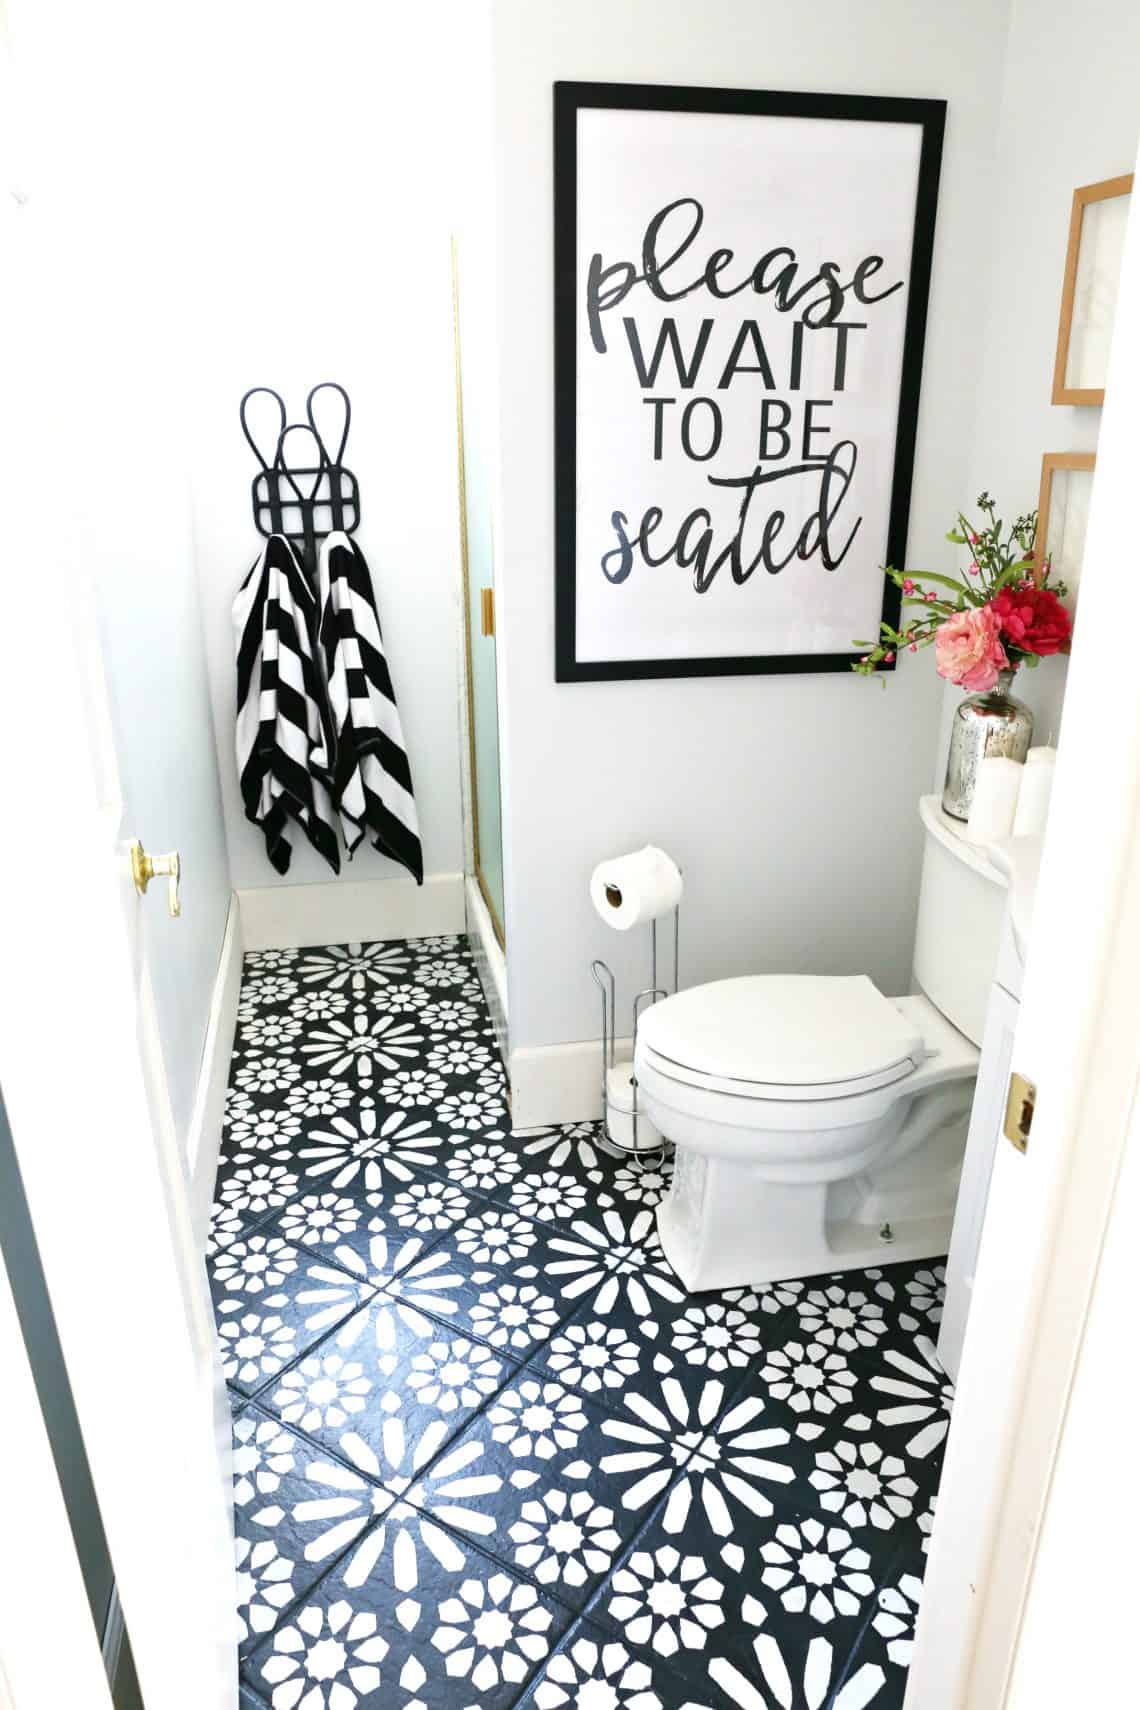 Black and white stenciled tile used in a bathroom remodel as a way to save money on a renovation